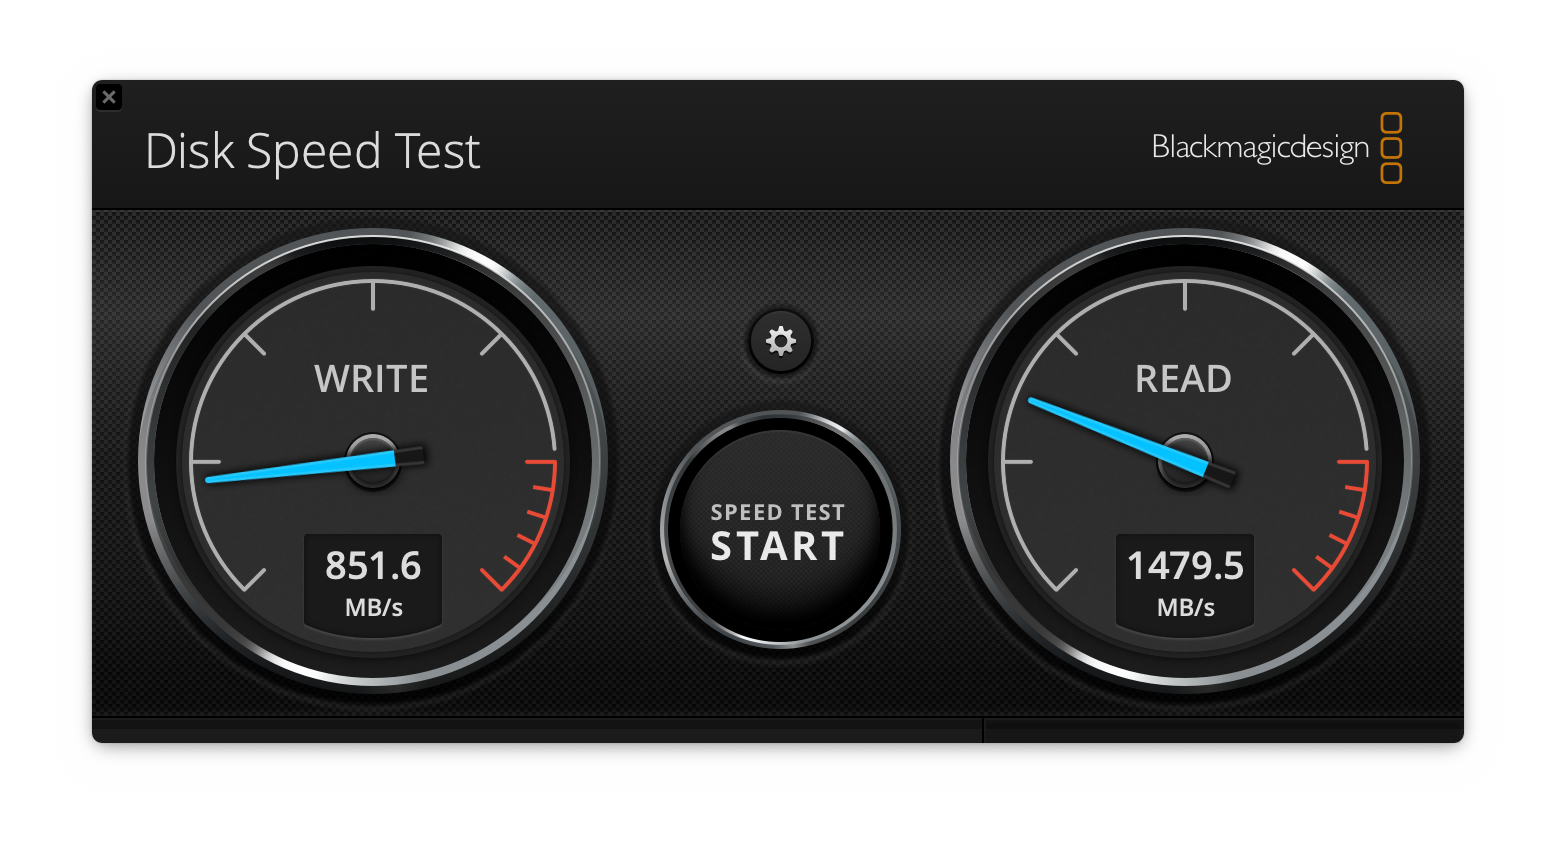 Write: 851.6MB/s, Read: 1479.5MB/s